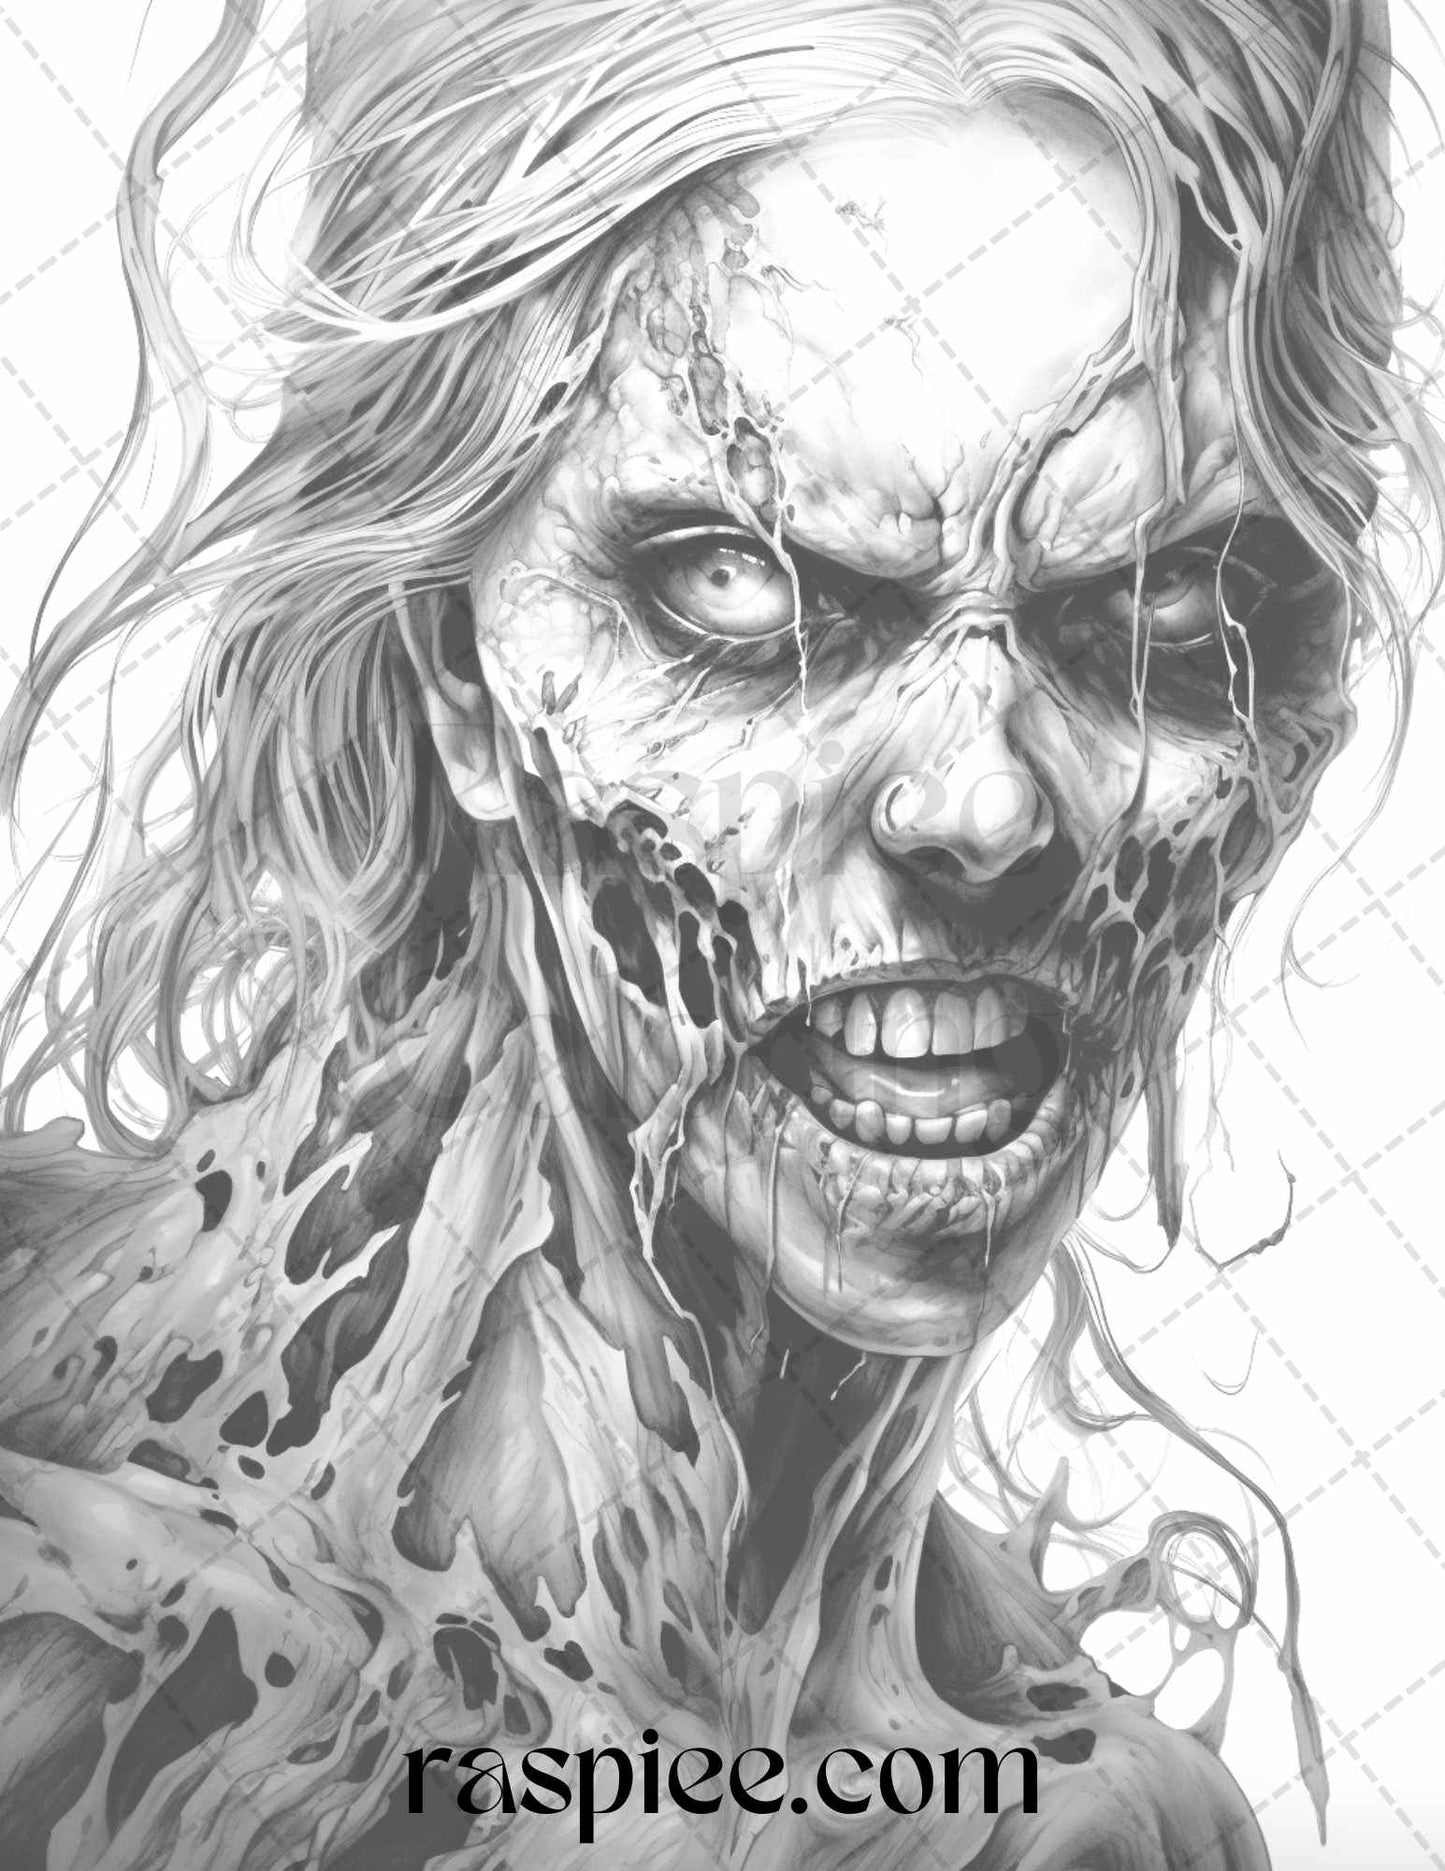 Scary Zombie Girls Grayscale Coloring Page, Creepy Fantasy Art for Adult Coloring Book, Spooky Zombies Printable Coloring Sheet, Halloween Coloring Pages for Adults, Horror-Themed Grayscale Illustration, High-Resolution Printable Coloring Art, Macabre Coloring for Adults, Undead Girls Halloween Coloring, Zombie Girls Instant Download PDF, Haunted Coloring Images for Adults